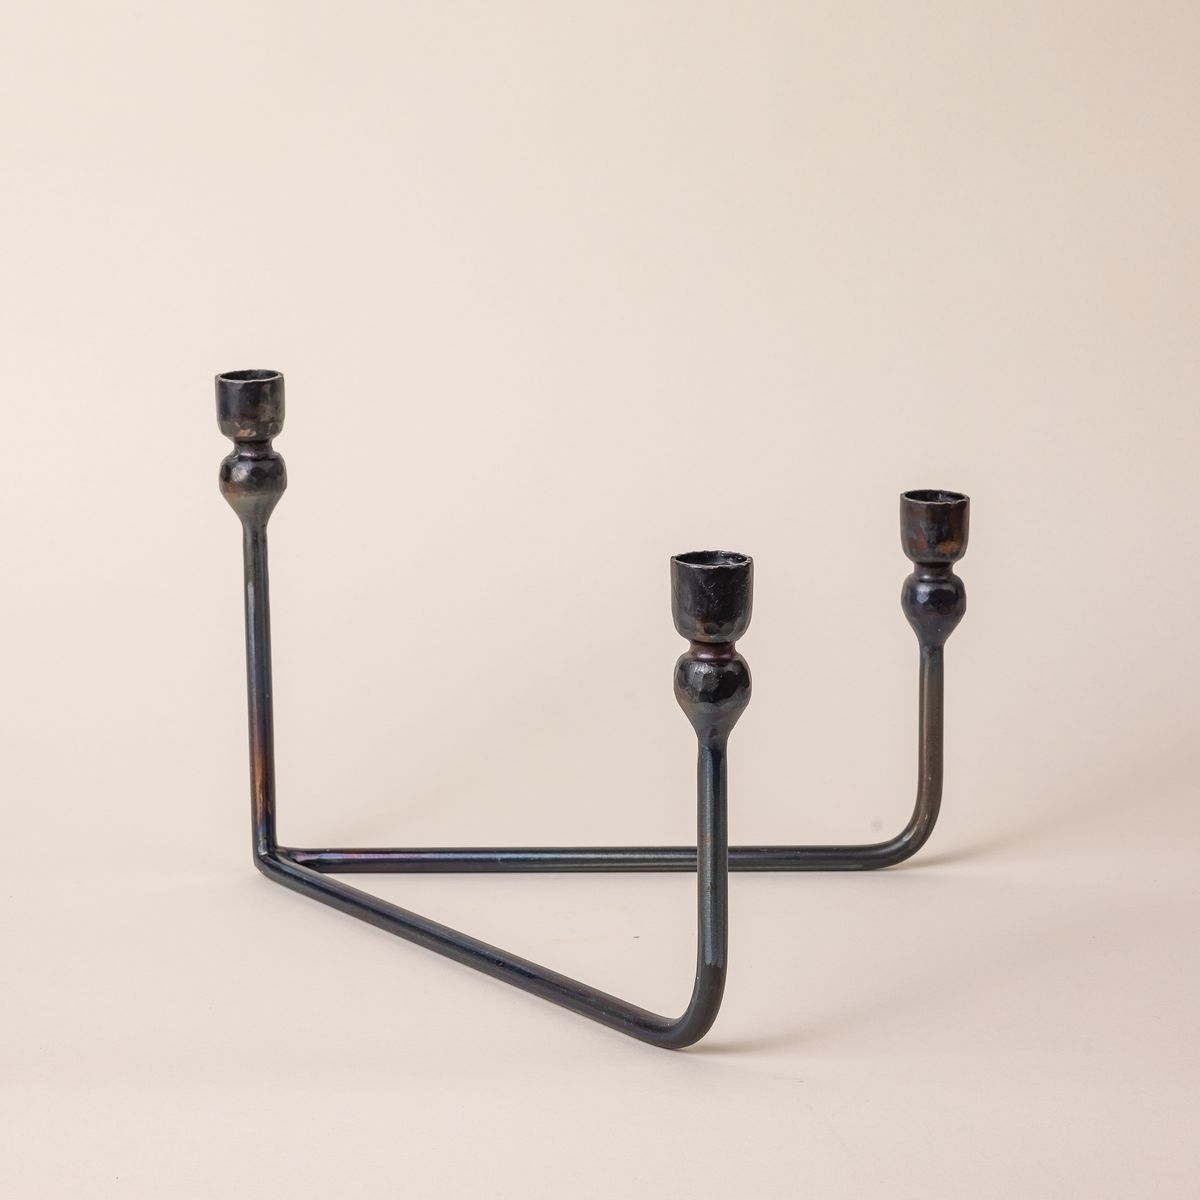 A sophisticated iron candelabra with a v-shaped base and 3 candlestick holders